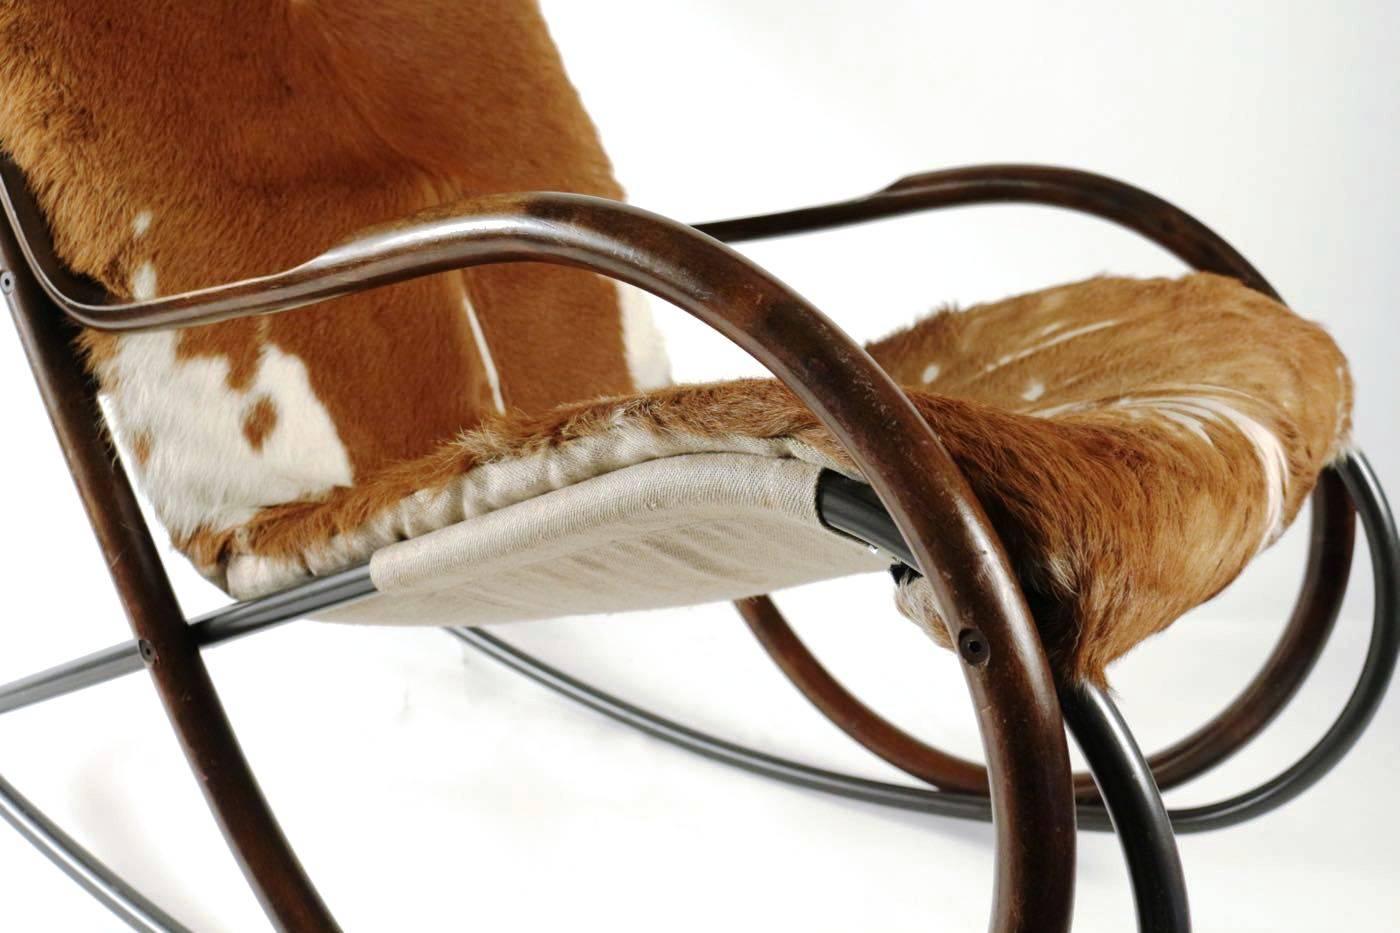 Swiss Rare and Original Nonna Rocking Chair, Paul Tuttle for Strassle, 1972 Cow Skin